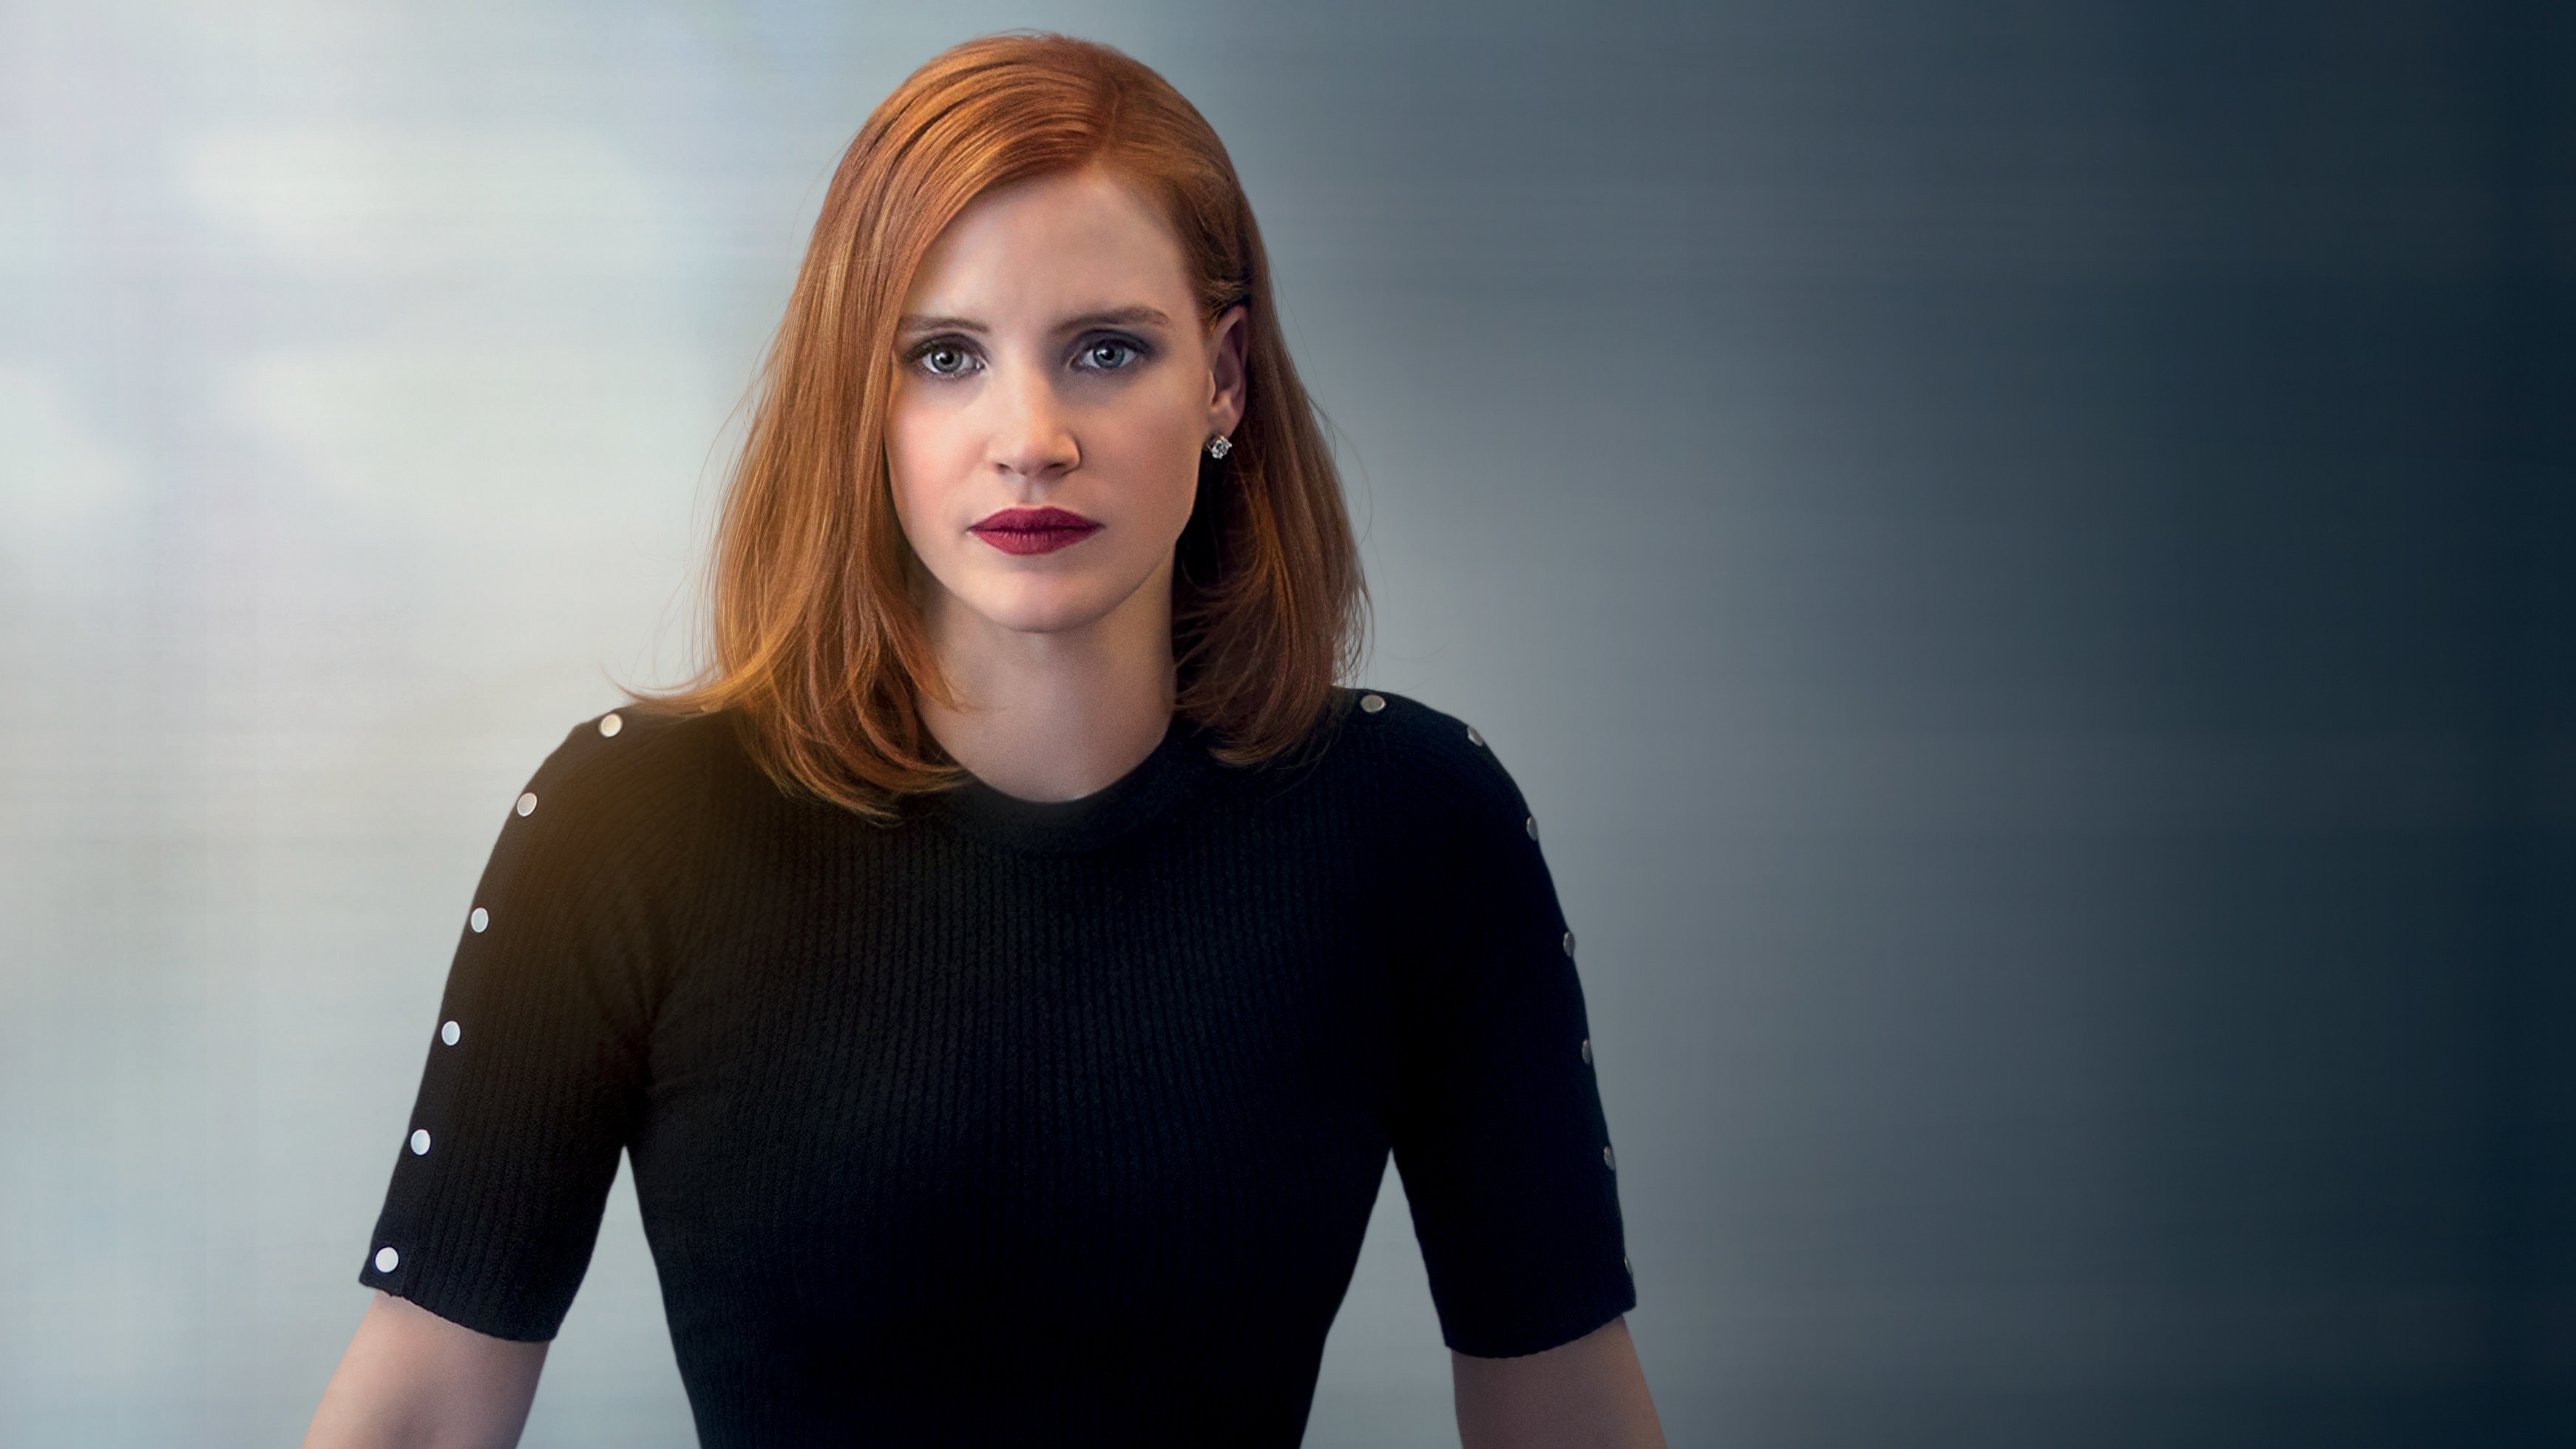 Jessica Chastain Wallpapers Wallpapertag Images, Photos, Reviews